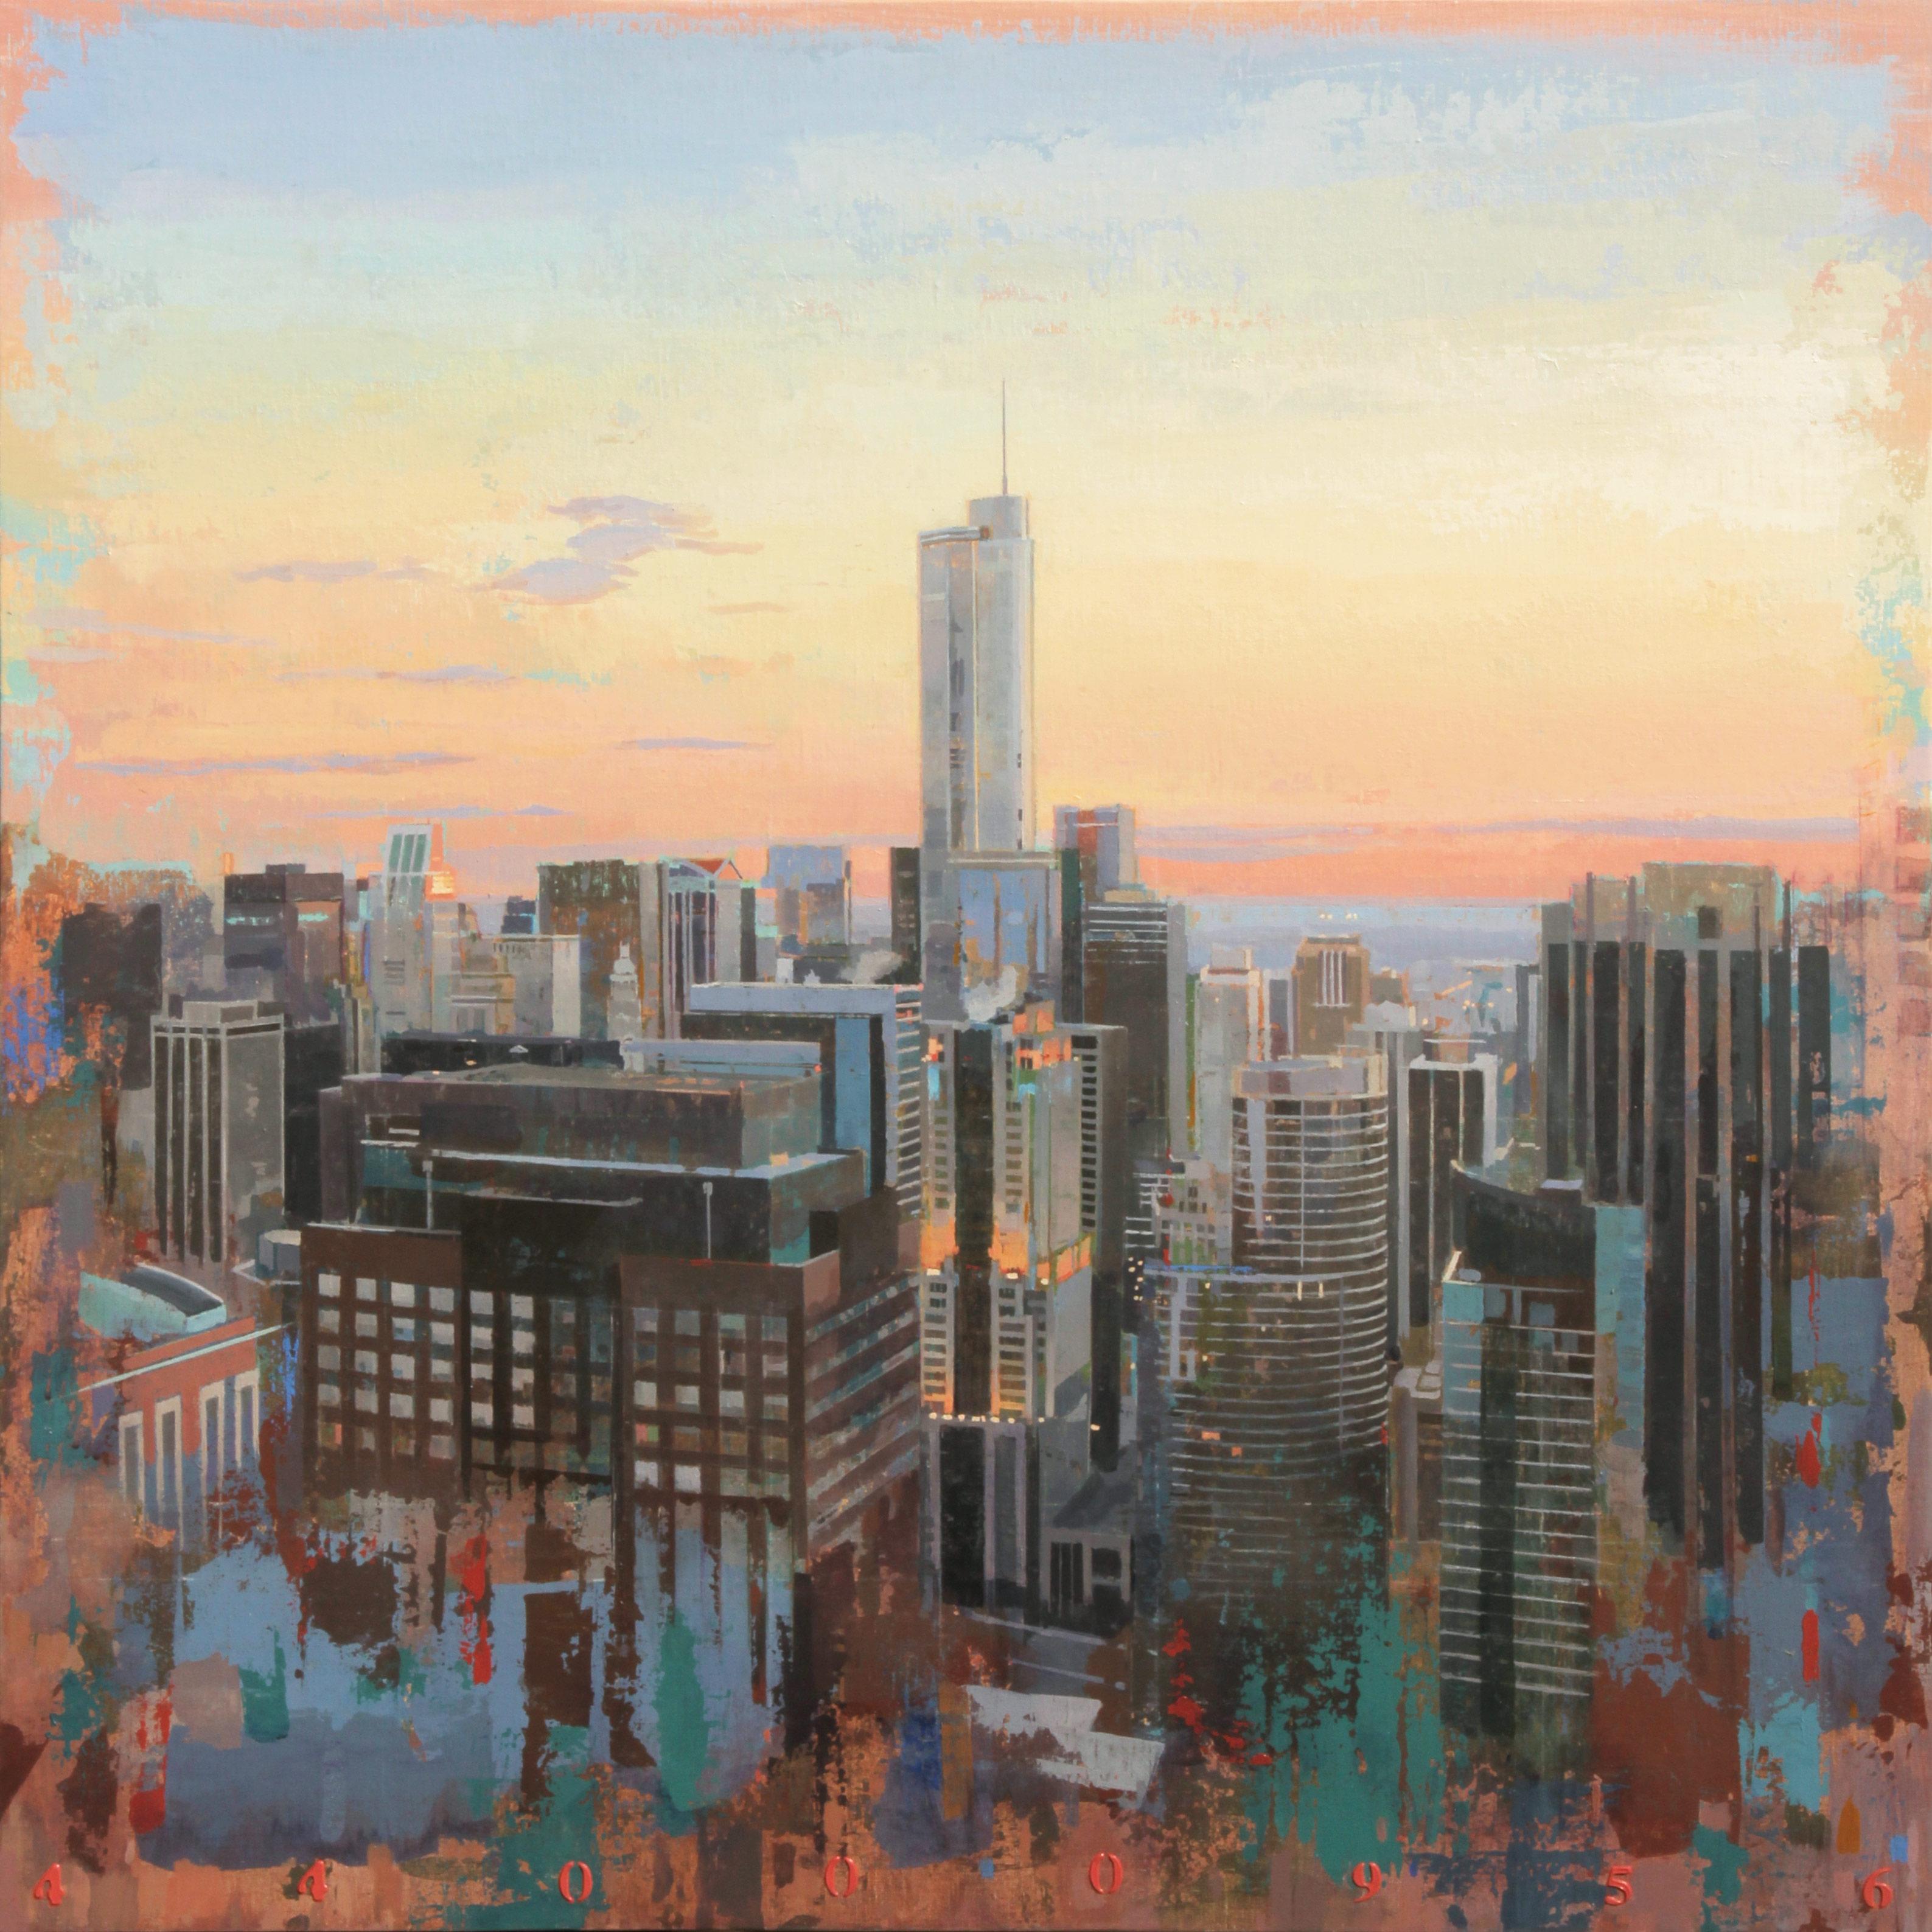 I Know Everything - Birds Eye View of Chicago Looking East, Oil & Acrylic